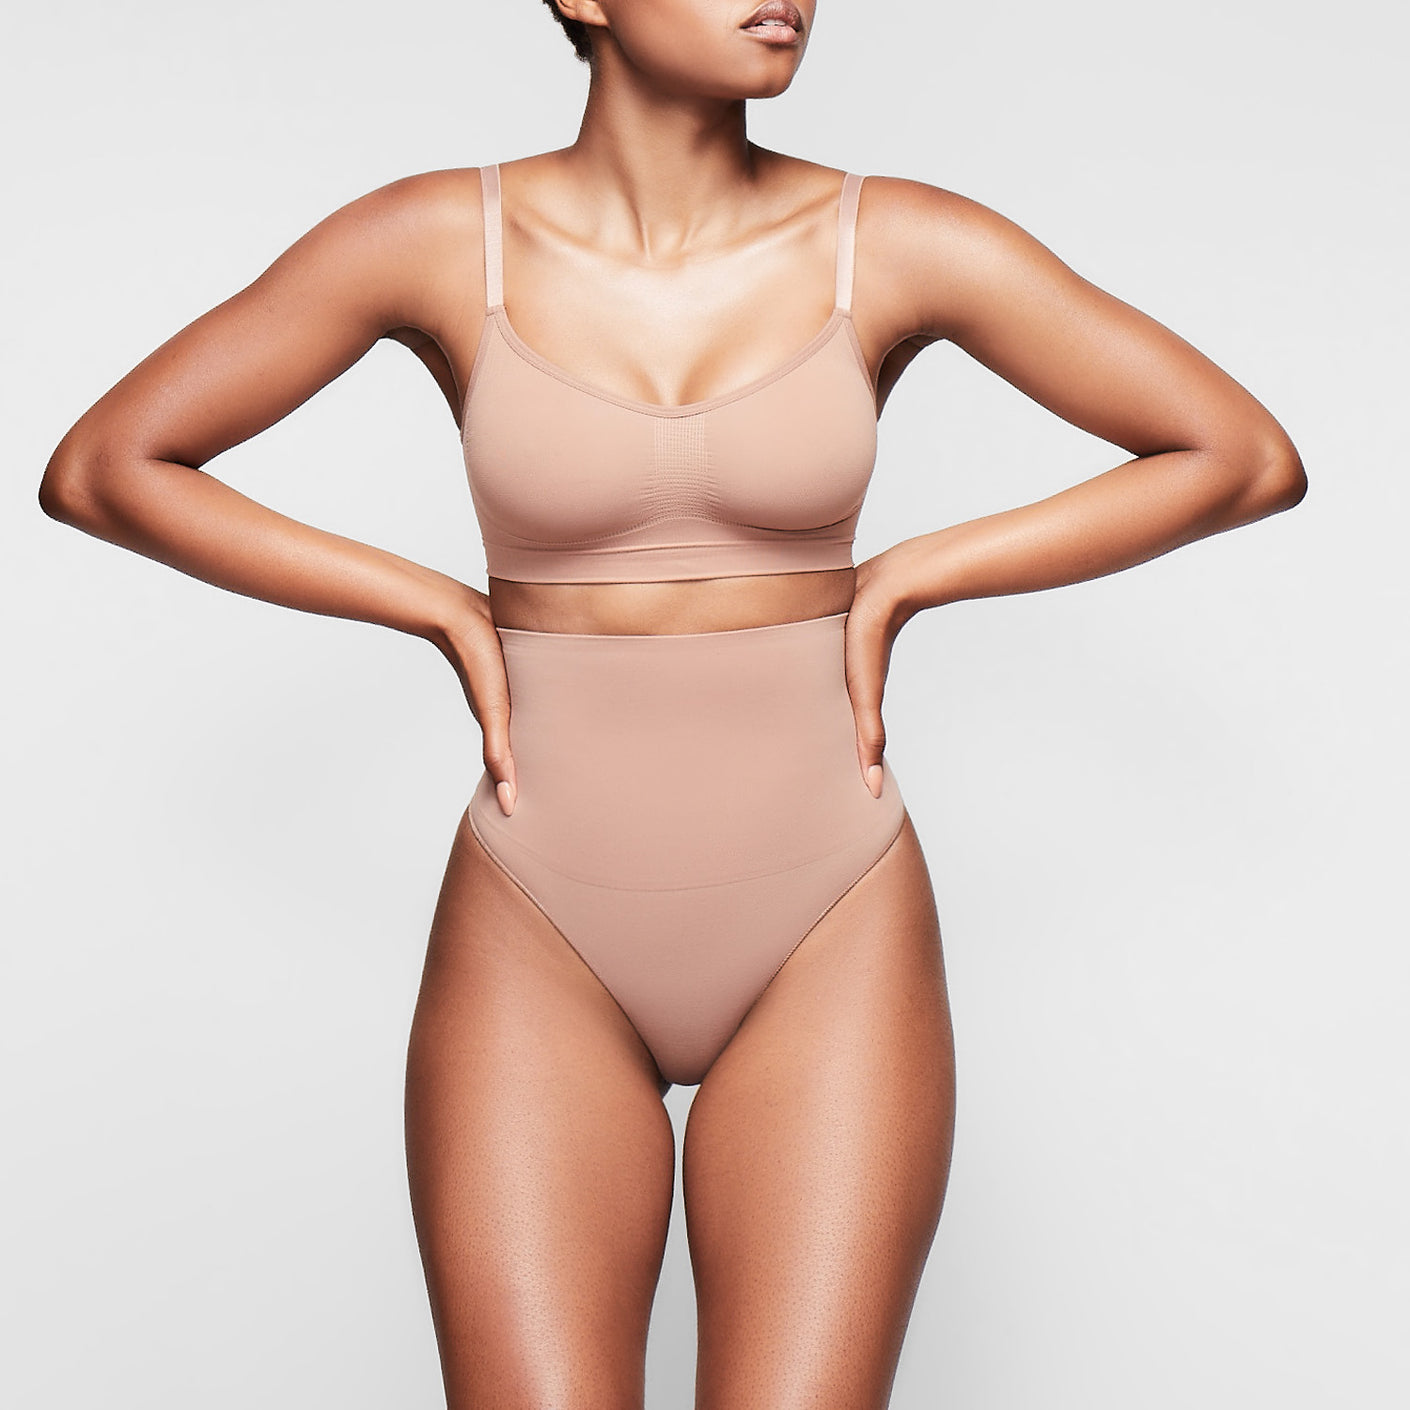 AirSlim® Every Day Bottoming Bodysuit - Thong & Brief Option